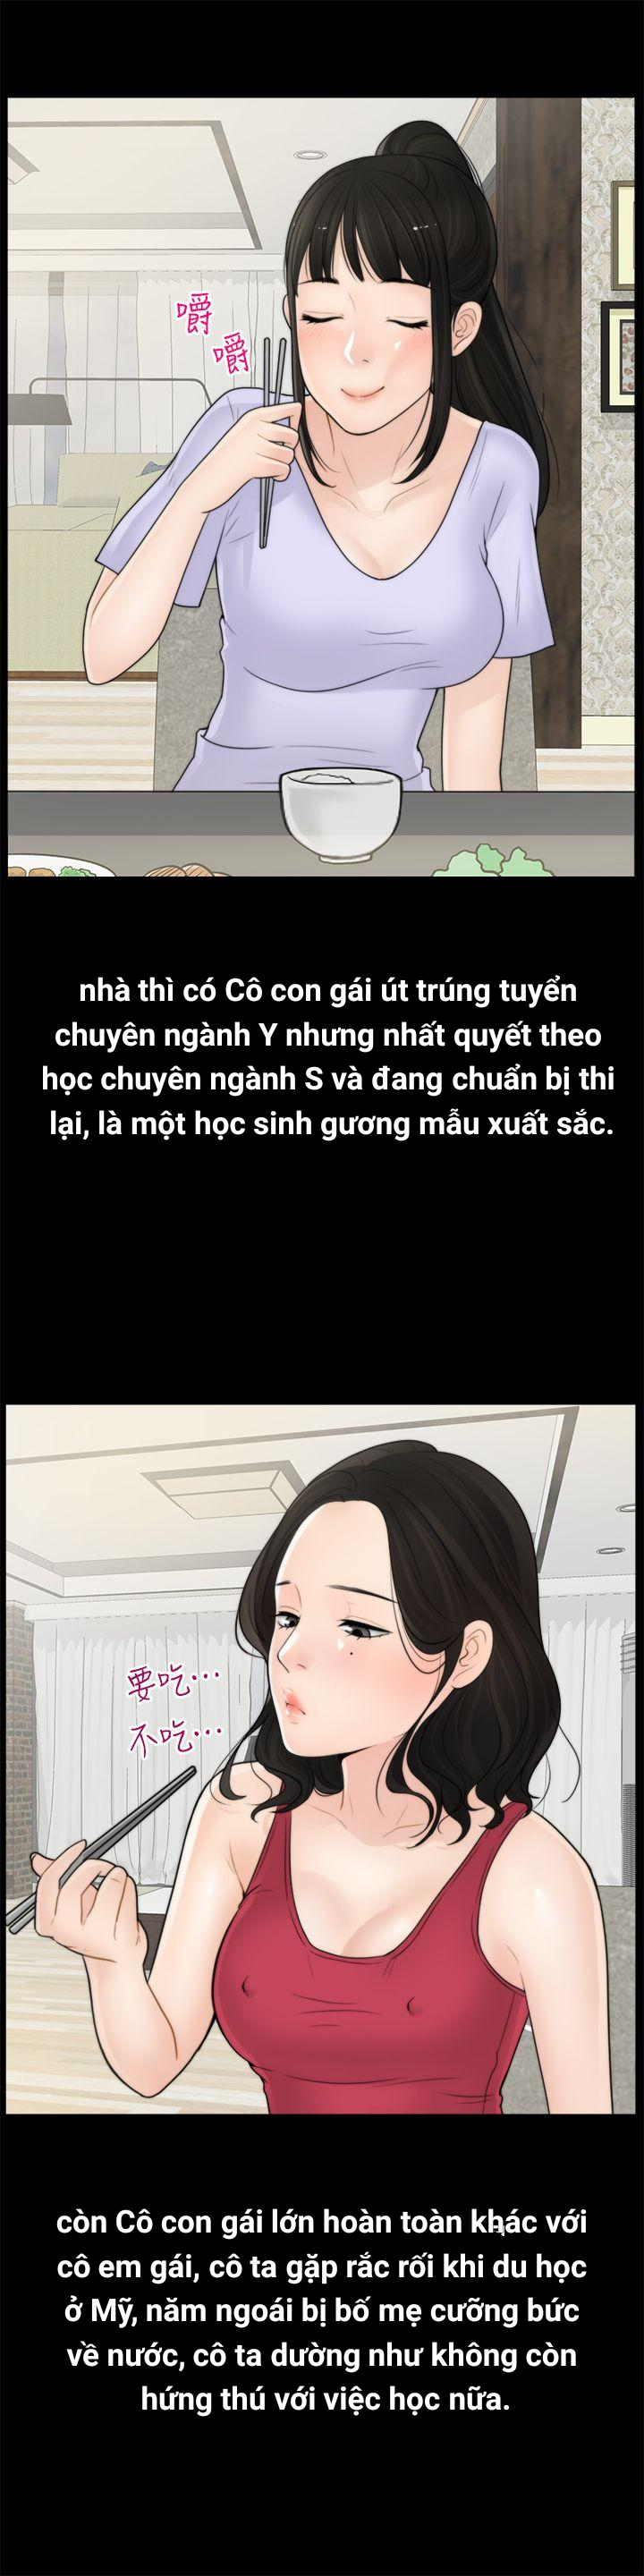 Chapter 001 : Chapter 01 ảnh 24